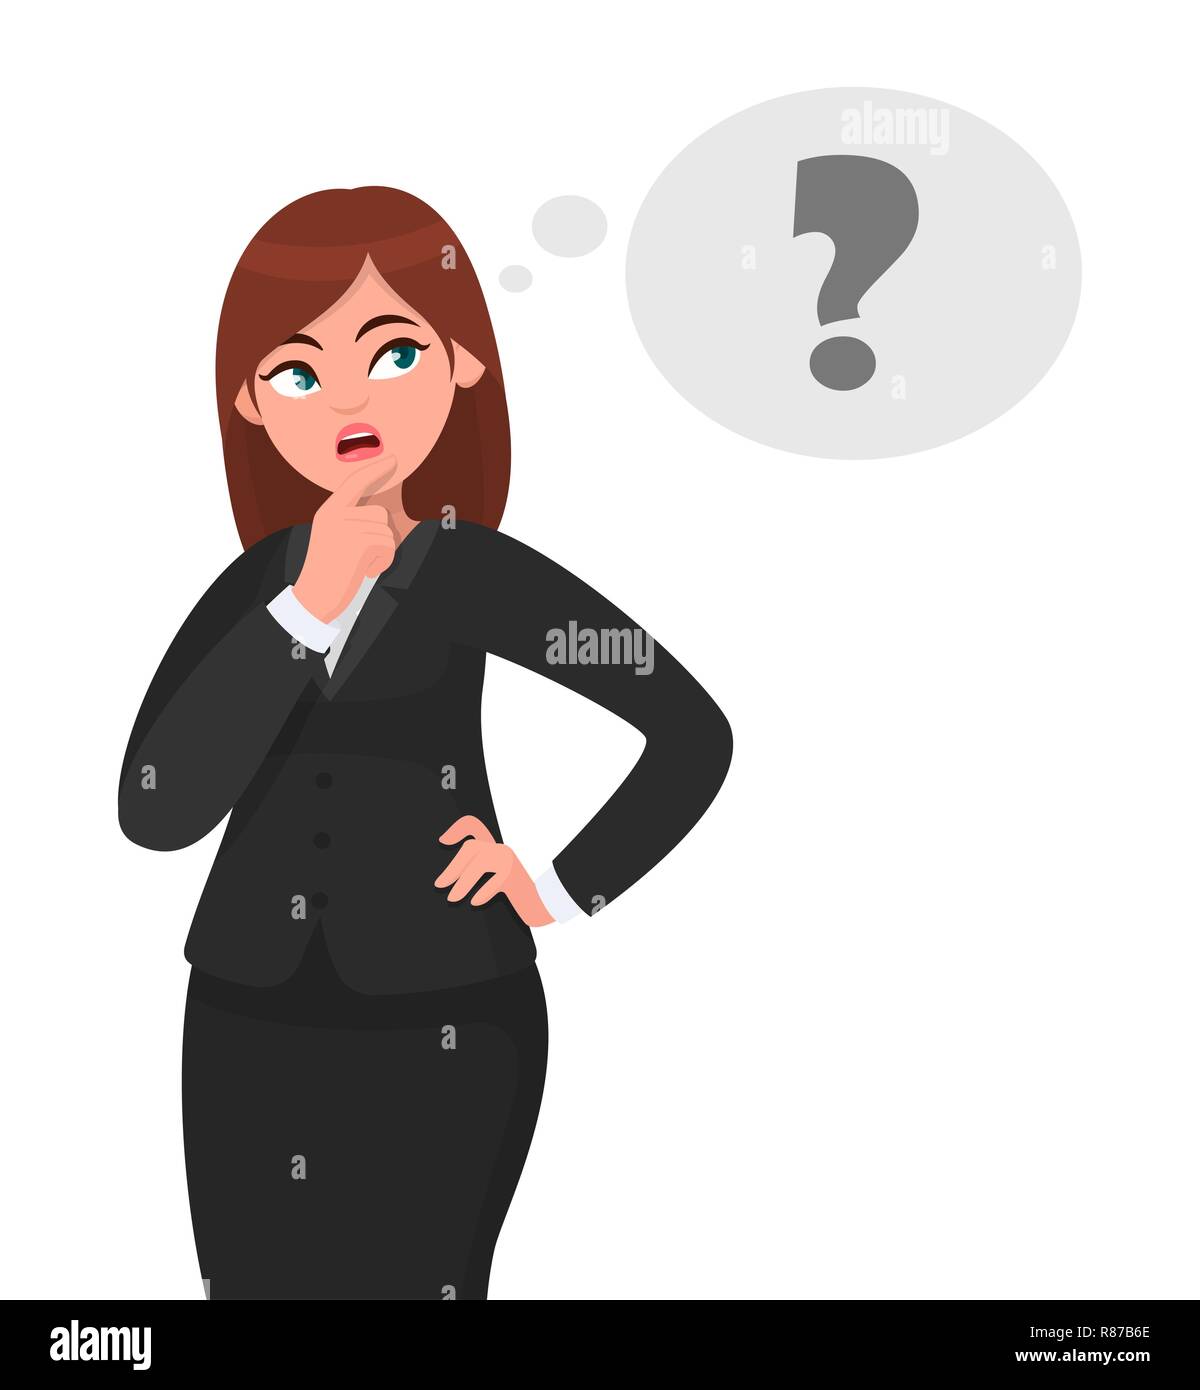 Thoughtful business woman is thinking, in the thought bubble question mark appearing. She is looking sideways and touching her face with a finger. Stock Vector